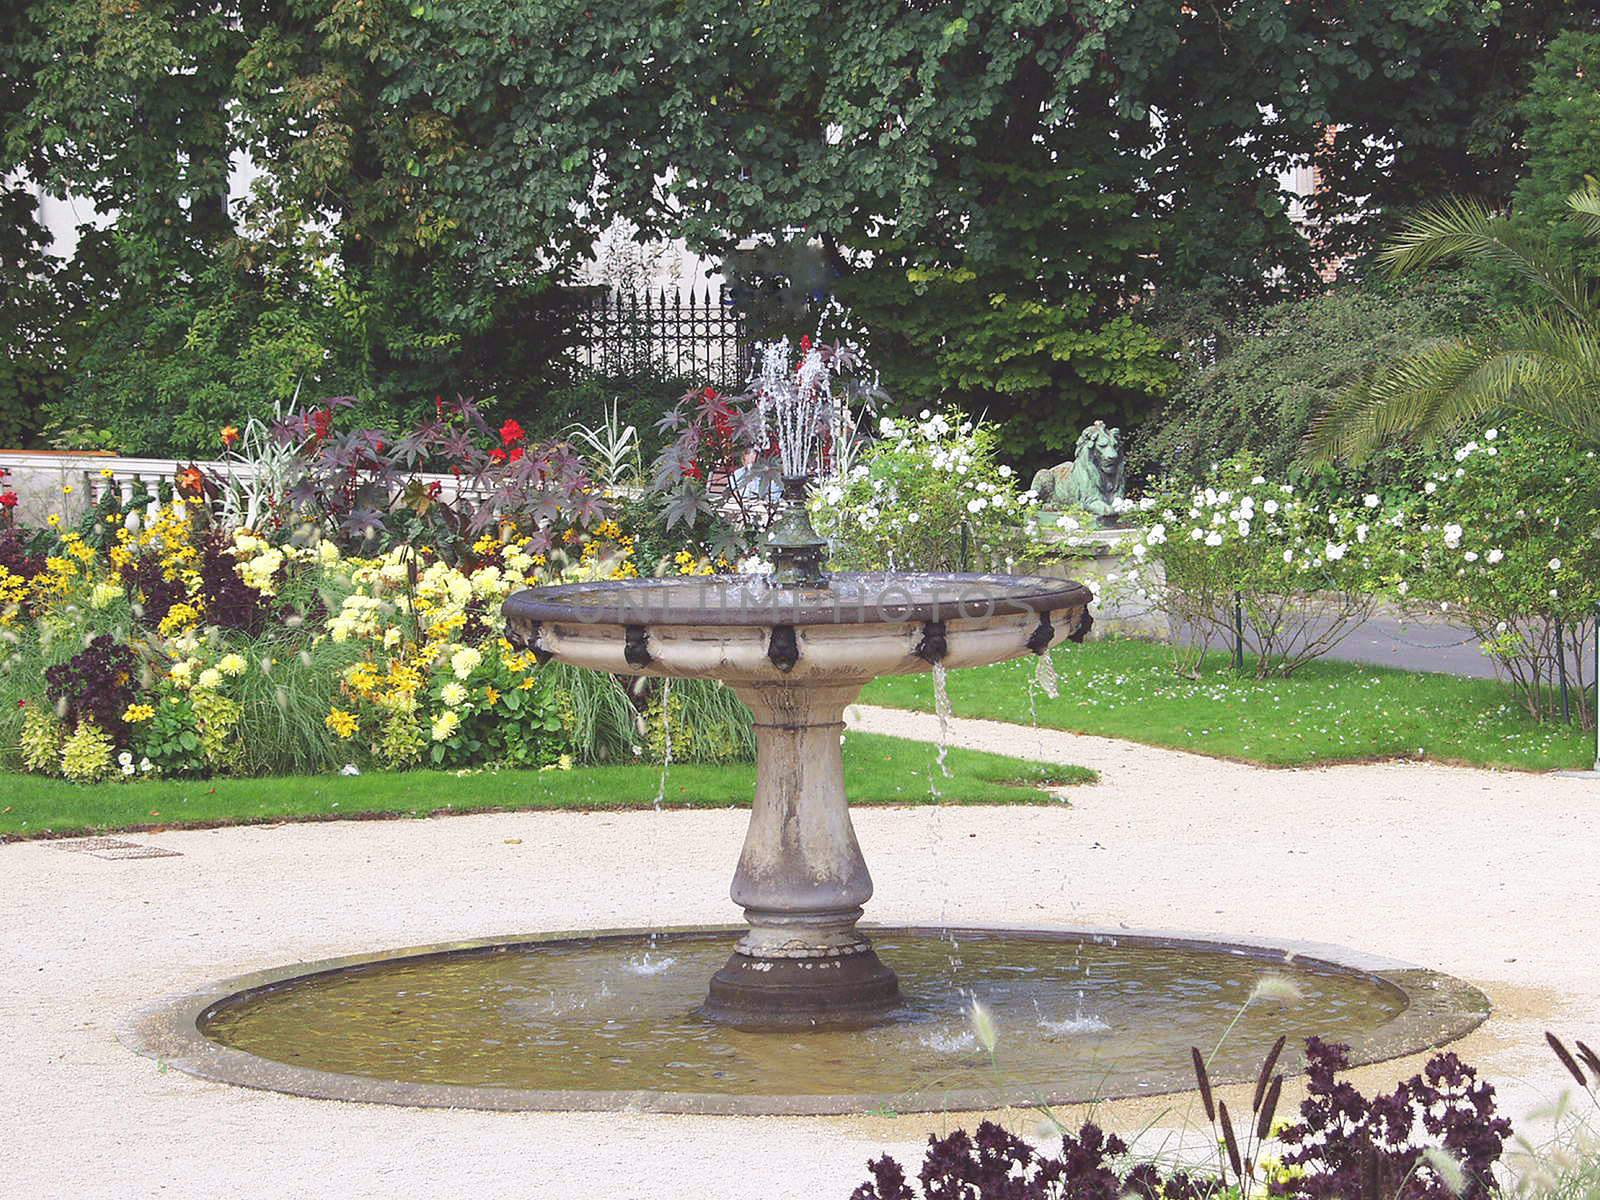 Fountain in City Park by NickNick